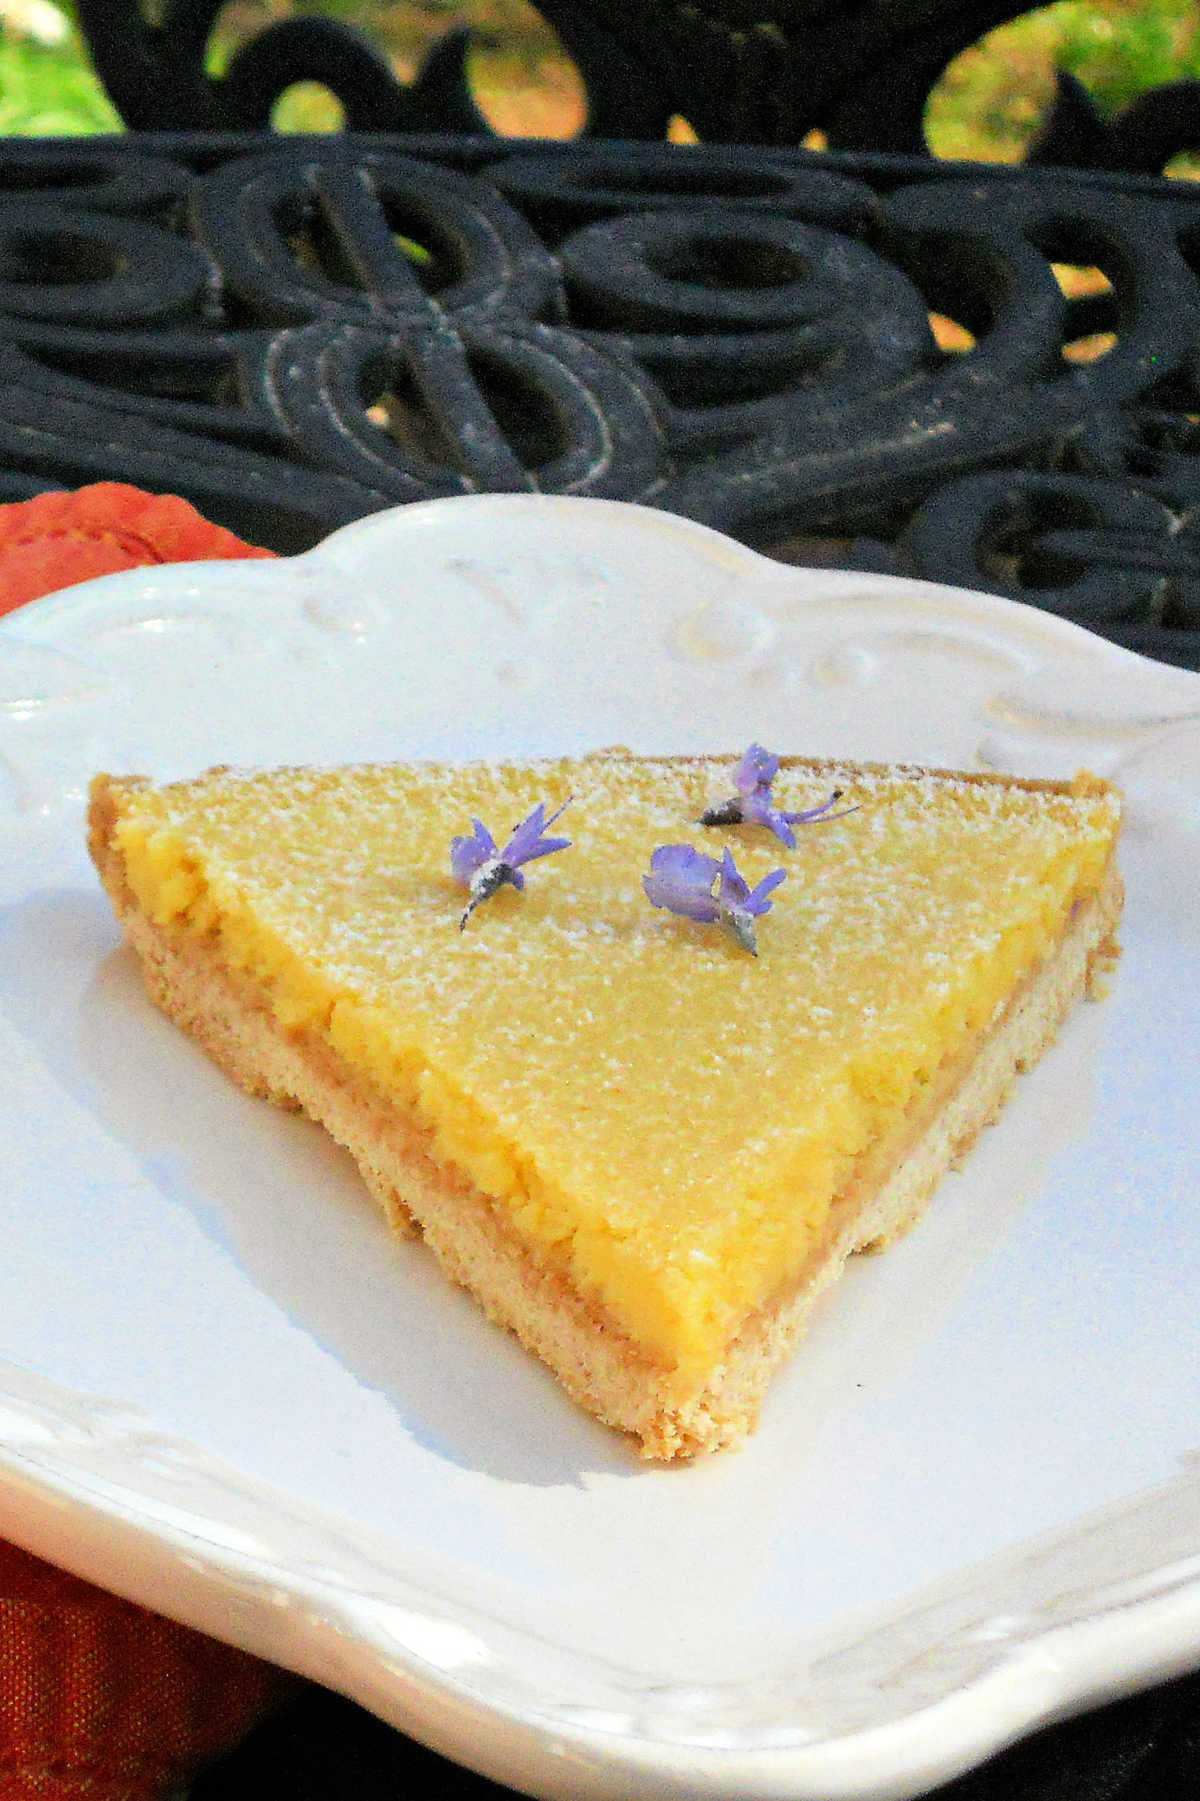 A slice of lemon tart on a white plate. The tart is decorated with small purple rosemary flowers.